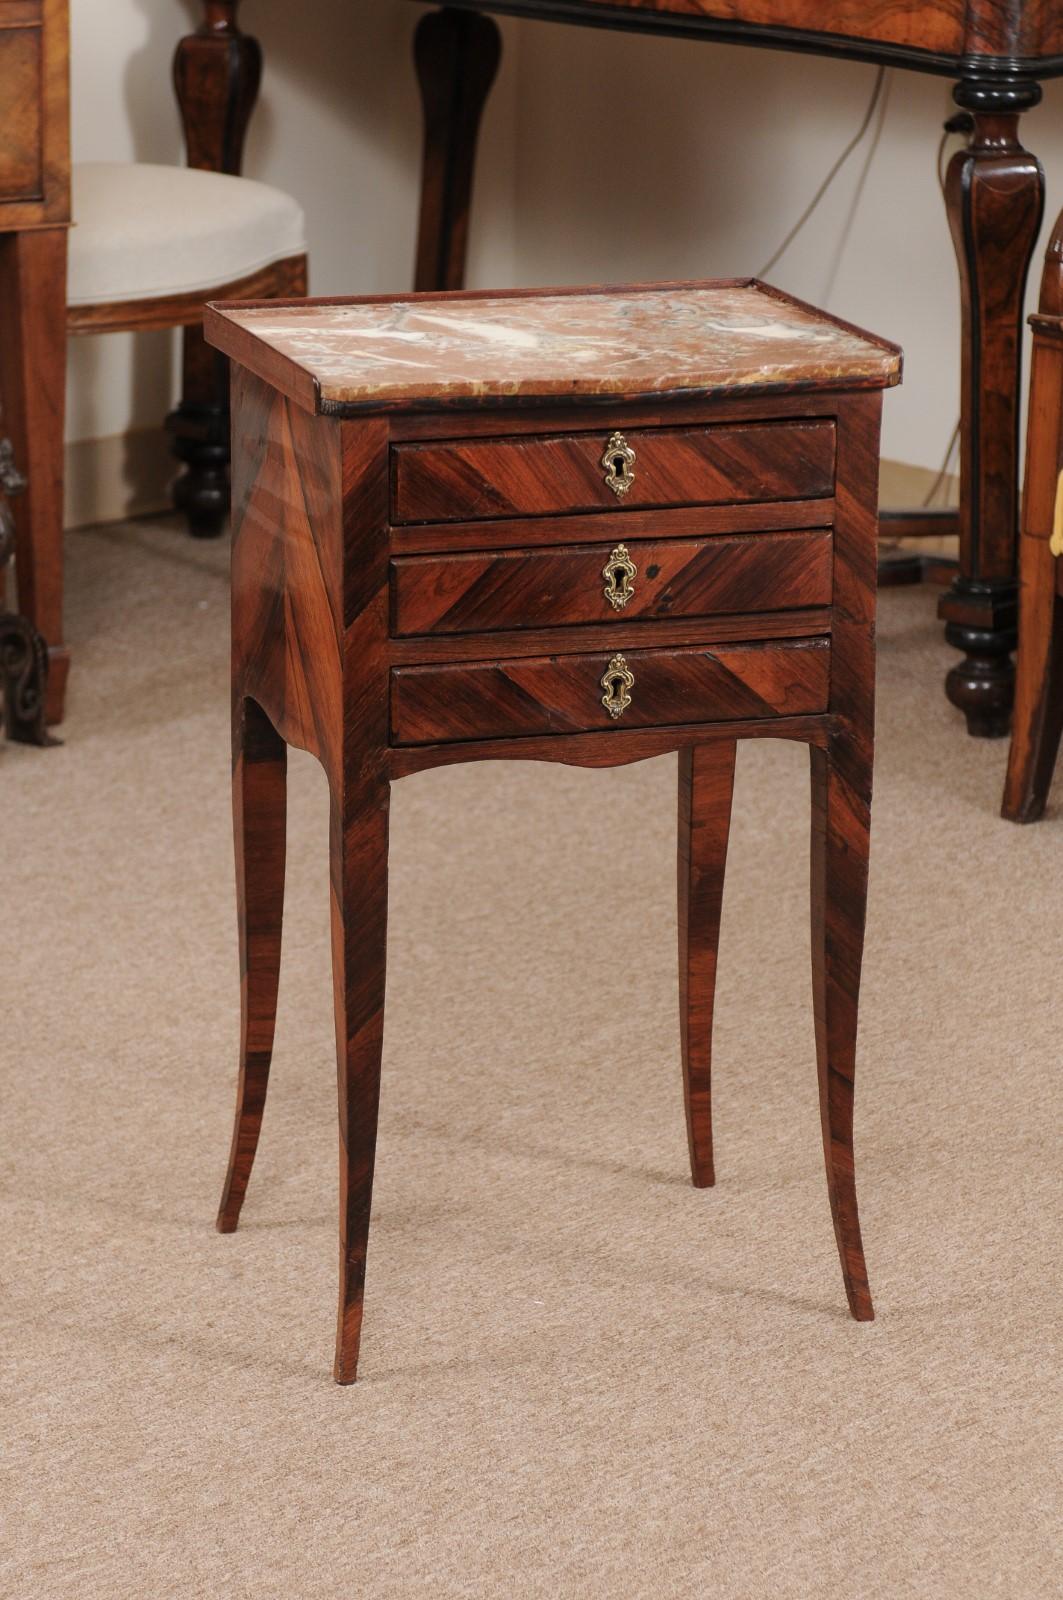 18th century French Louis XV period tulipwood chevet with 3 drawers & inset marble top.